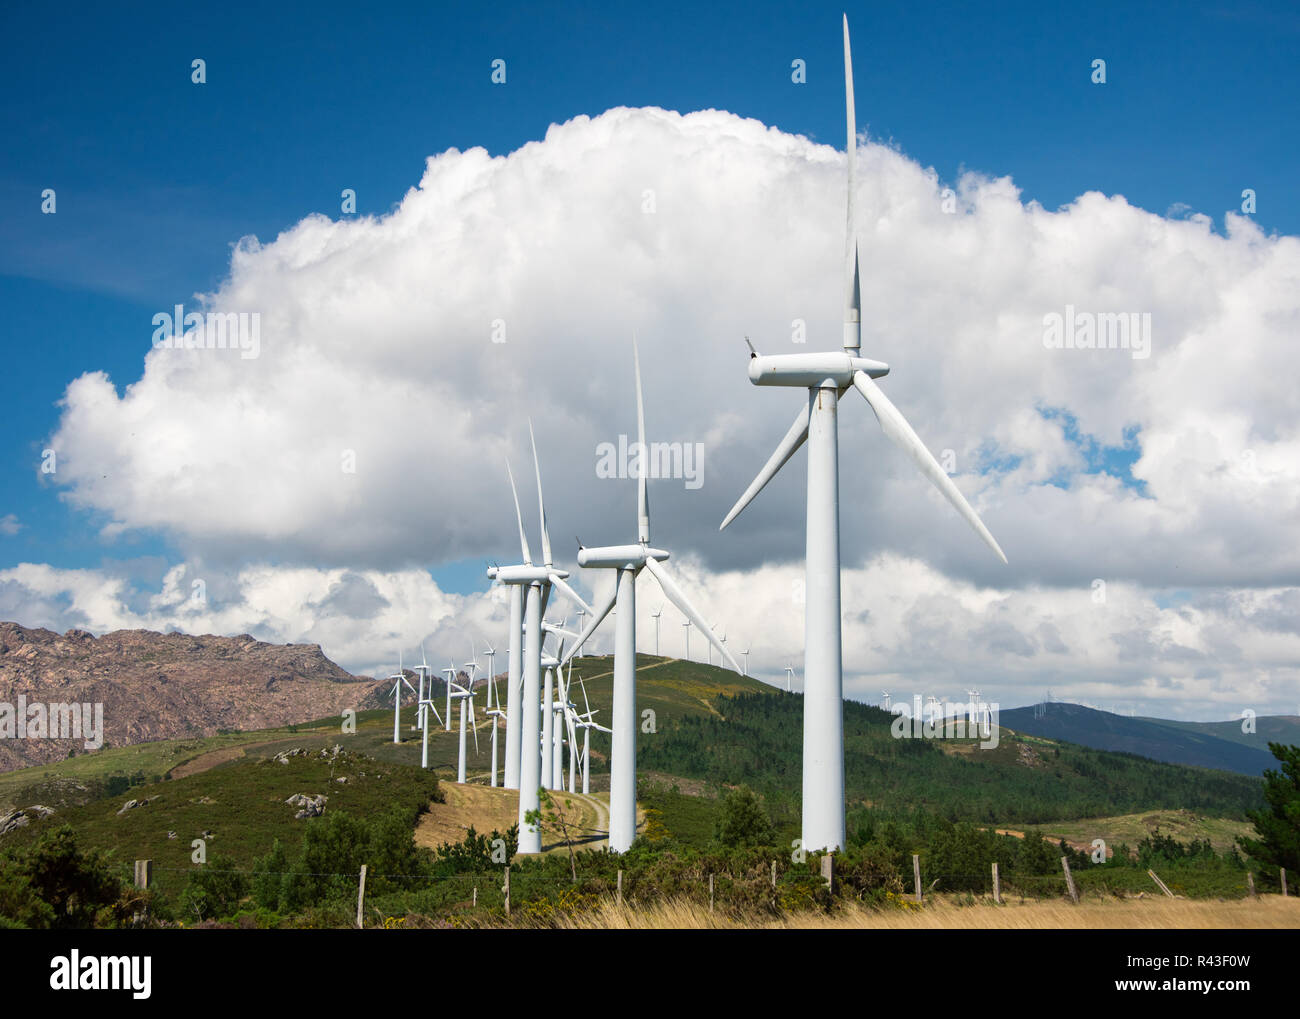 onshore wind turbines for electricity generation in wind farm Stock Photo